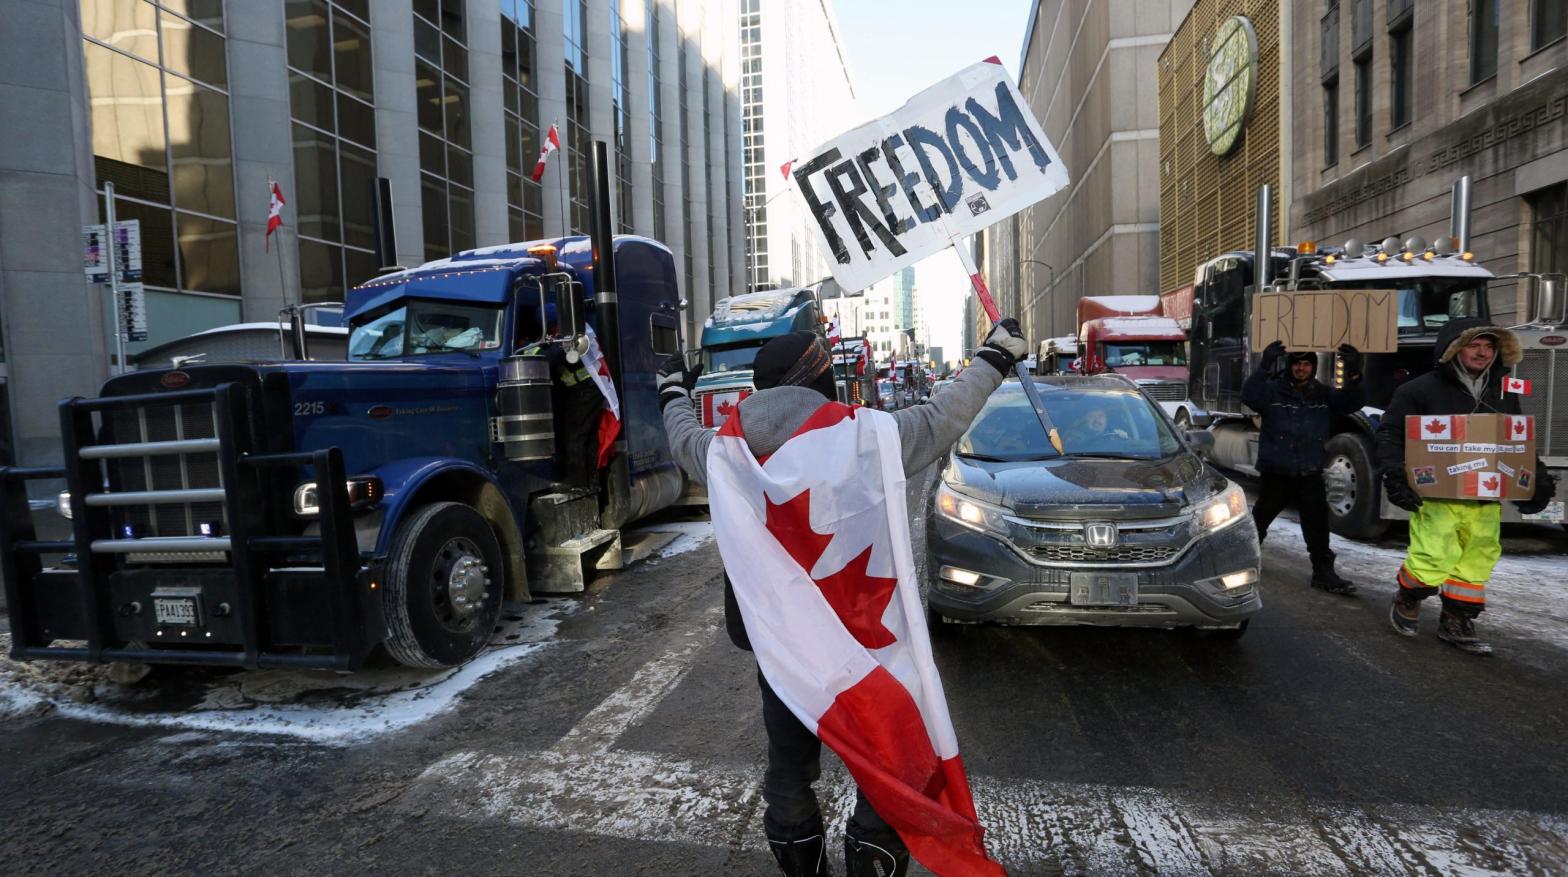 Truckers and supporters protest against mandates and restrictions related to Covid-19 vaccines in Ottawa, Ontario, Canada, on February 5, 2022. (Photo: Dave Chan/AFP, Getty Images)